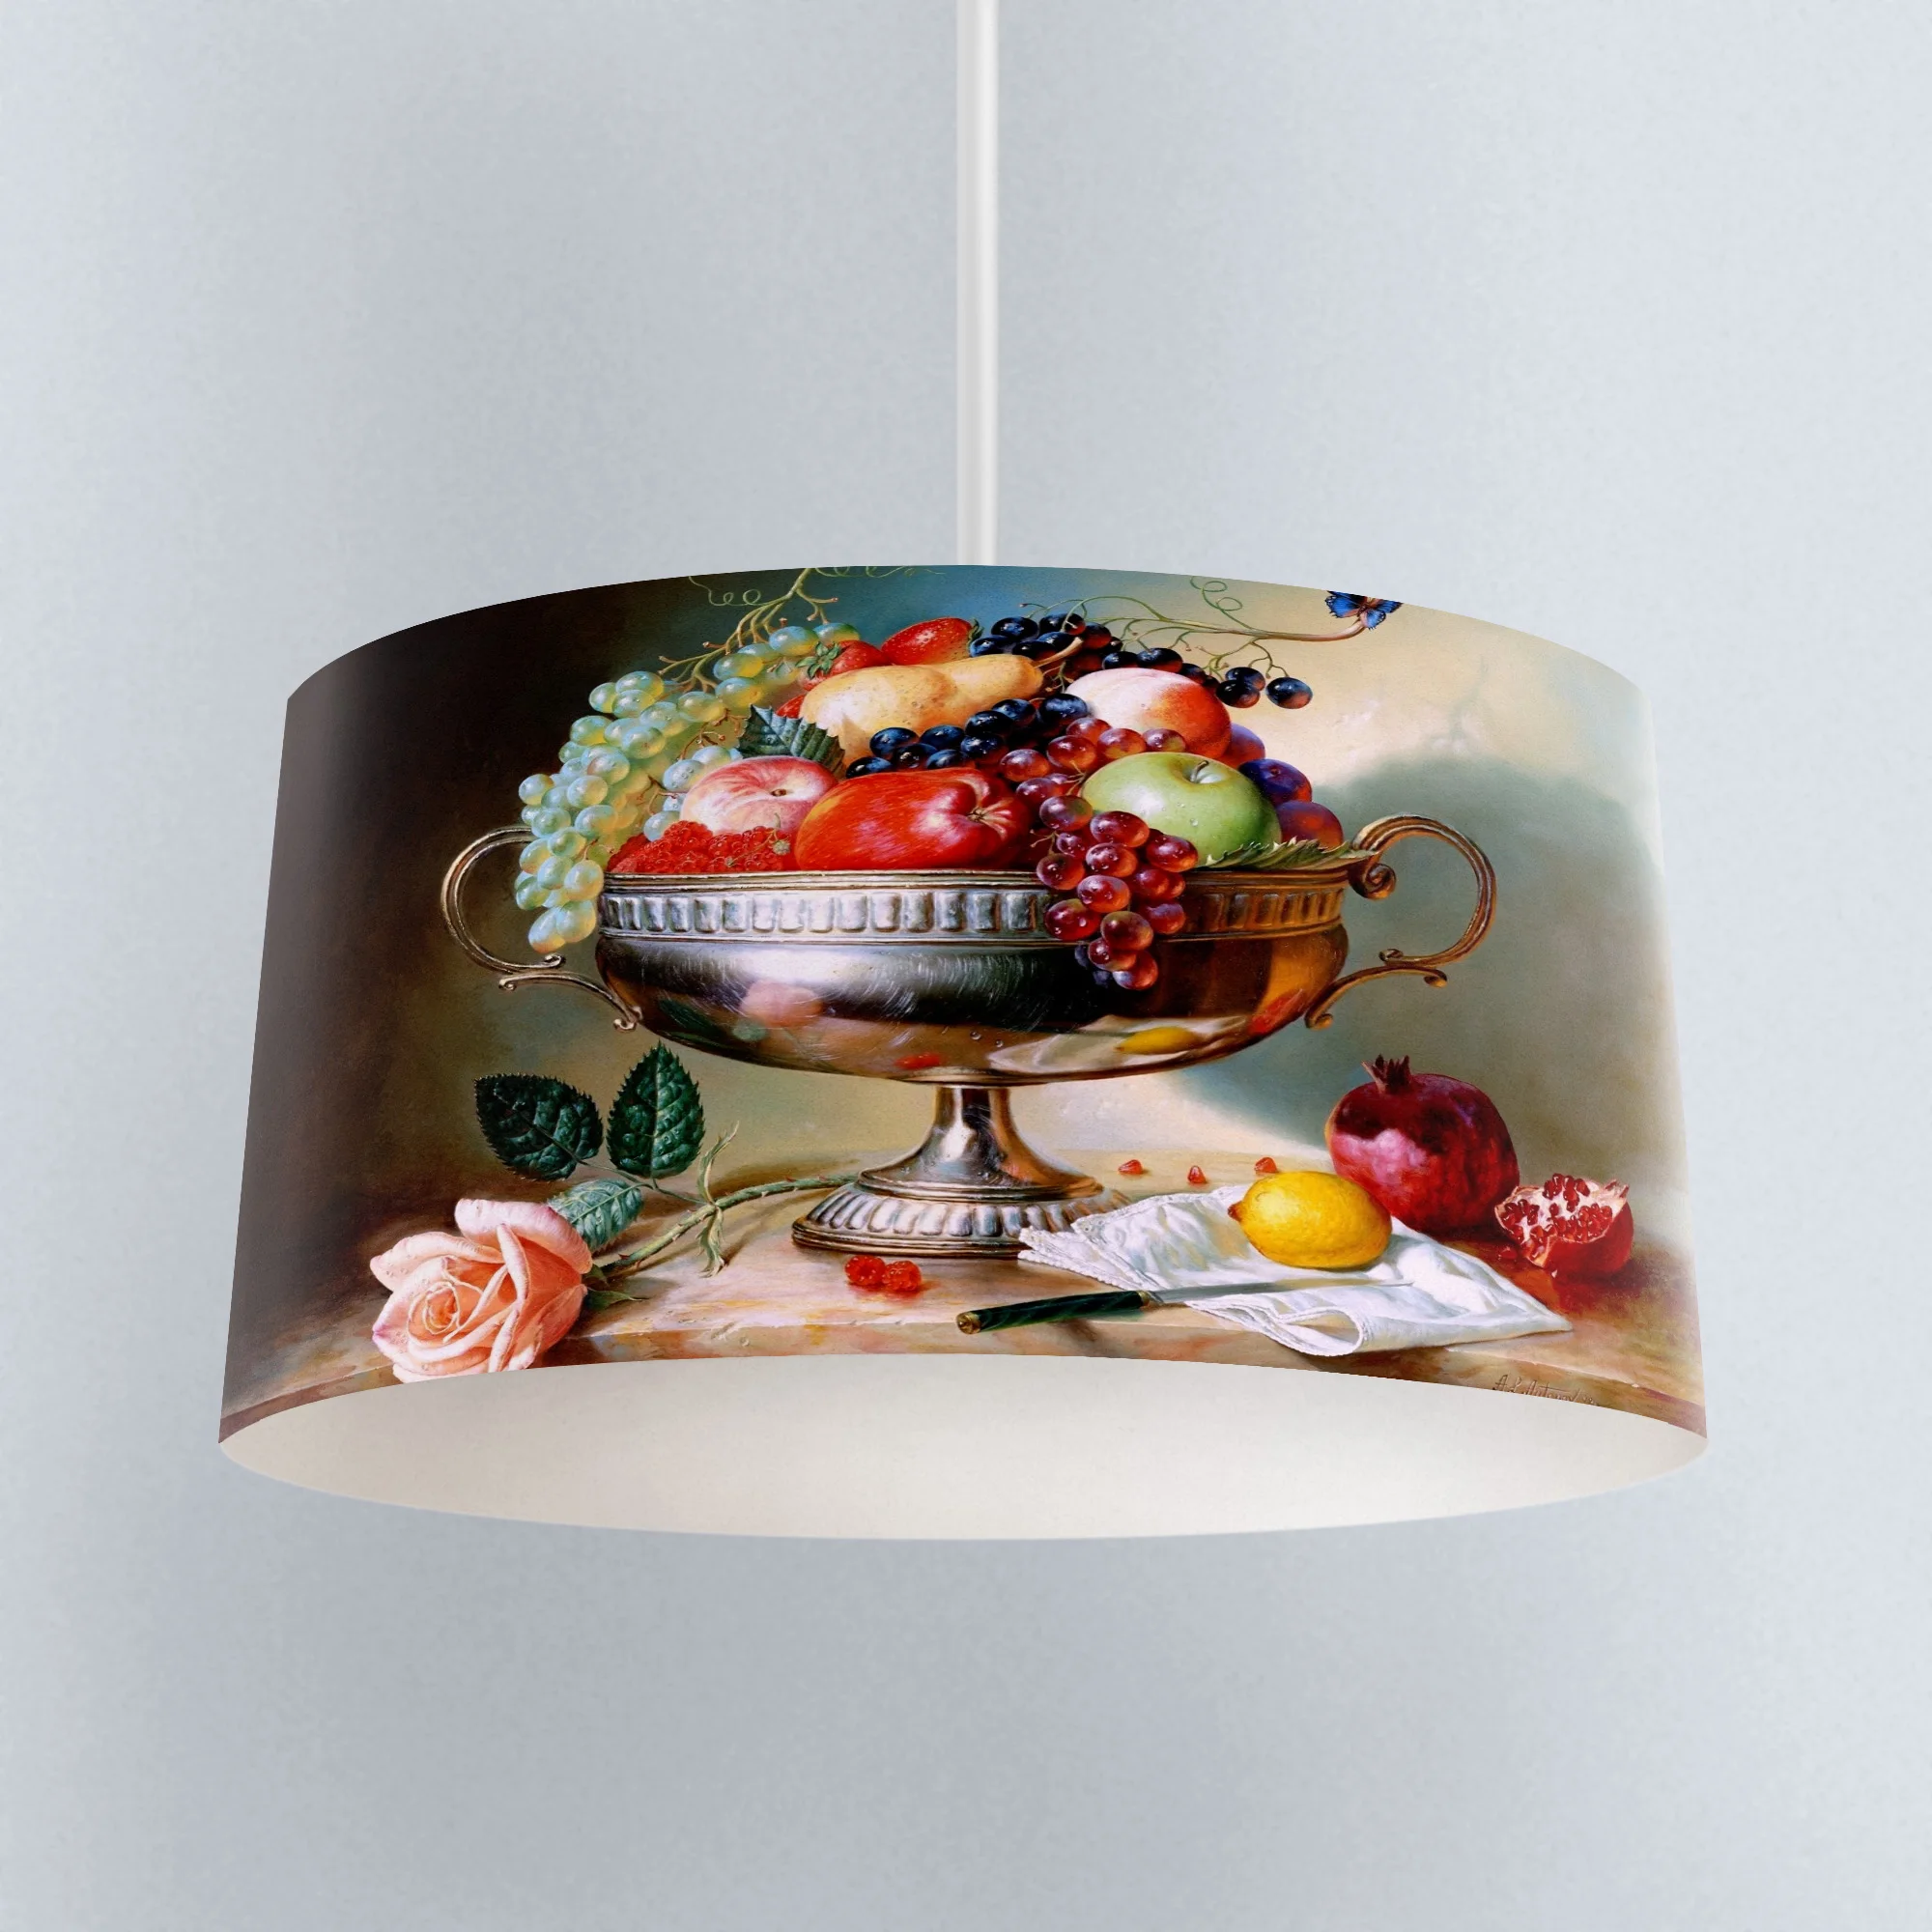 

Else Colored Apple Fruits in Plates Printed Fabric Kitchen Chandelier Lamp Drum Lampshade Floor Ceiling Pendant Light Shade